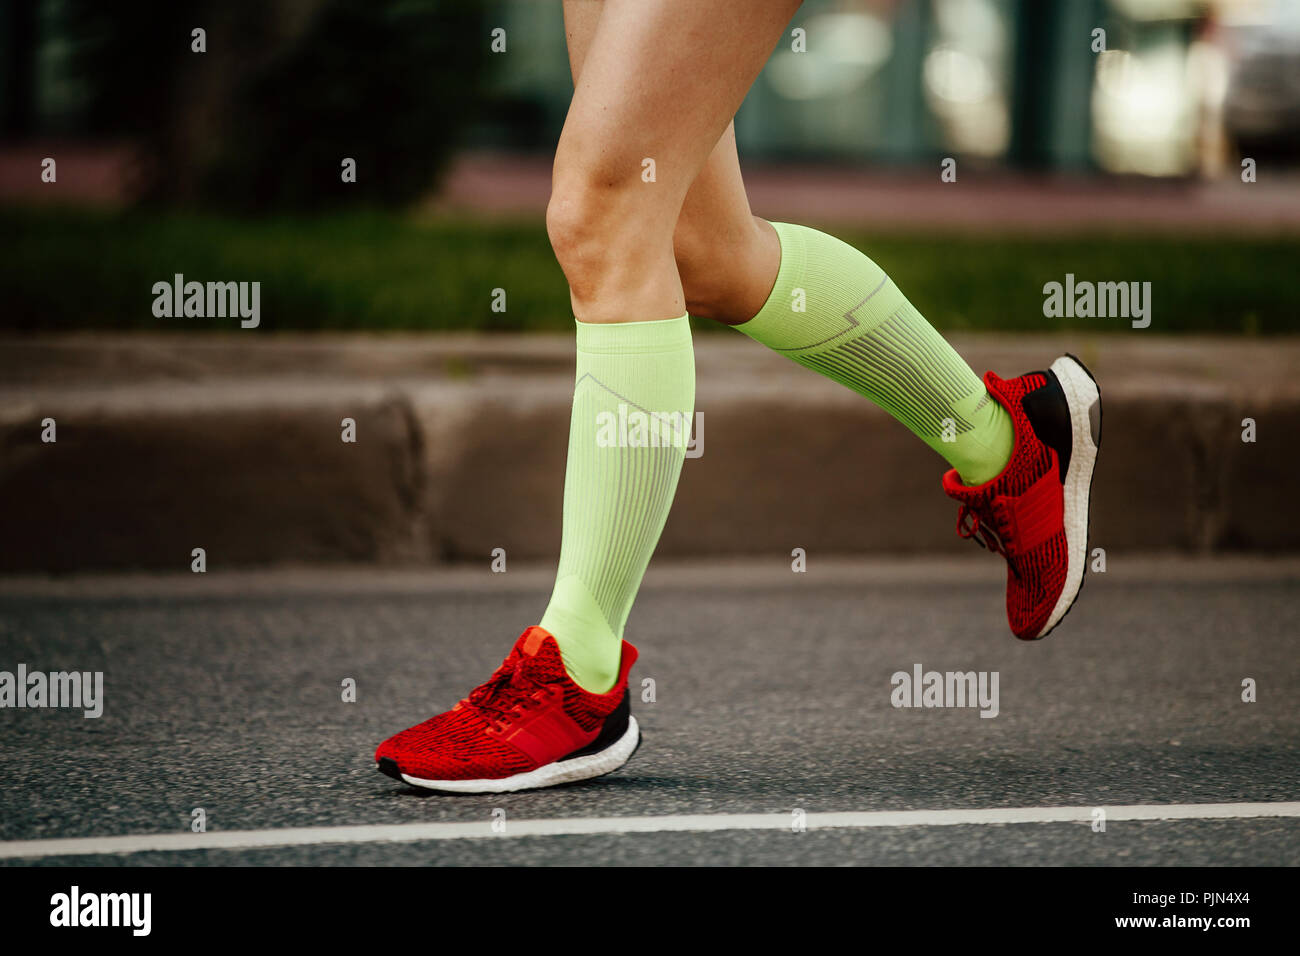 women feet runner in green compression socks and red running shoes ...